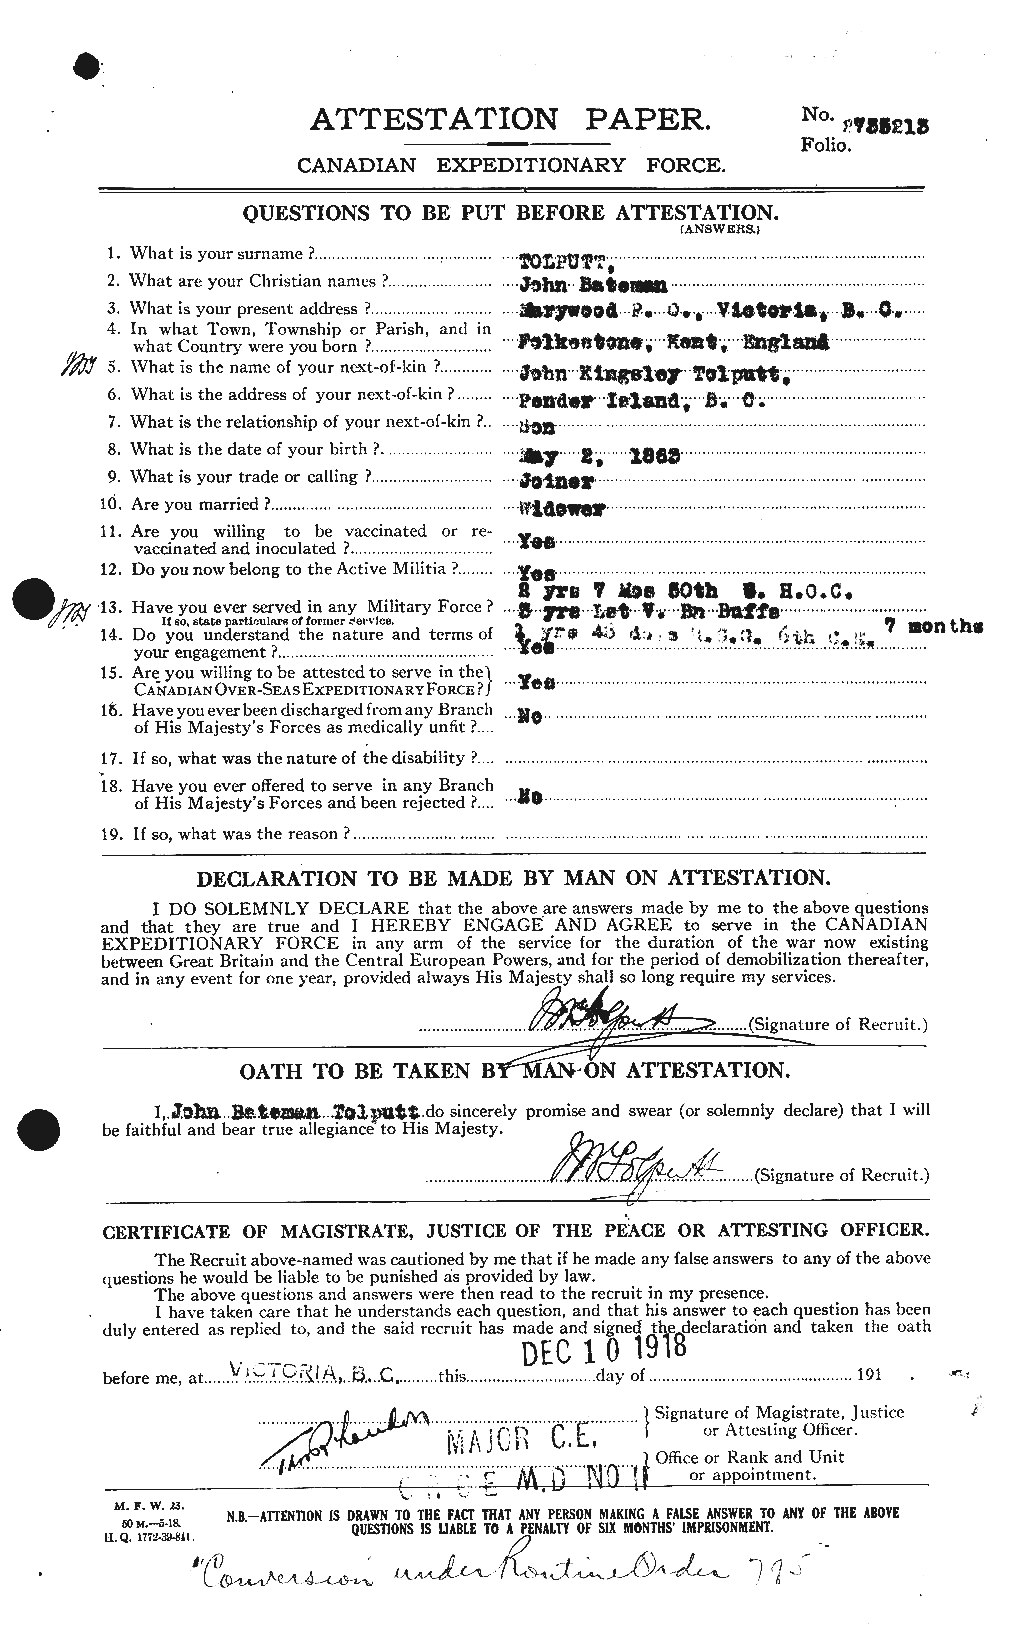 Personnel Records of the First World War - CEF 643083a